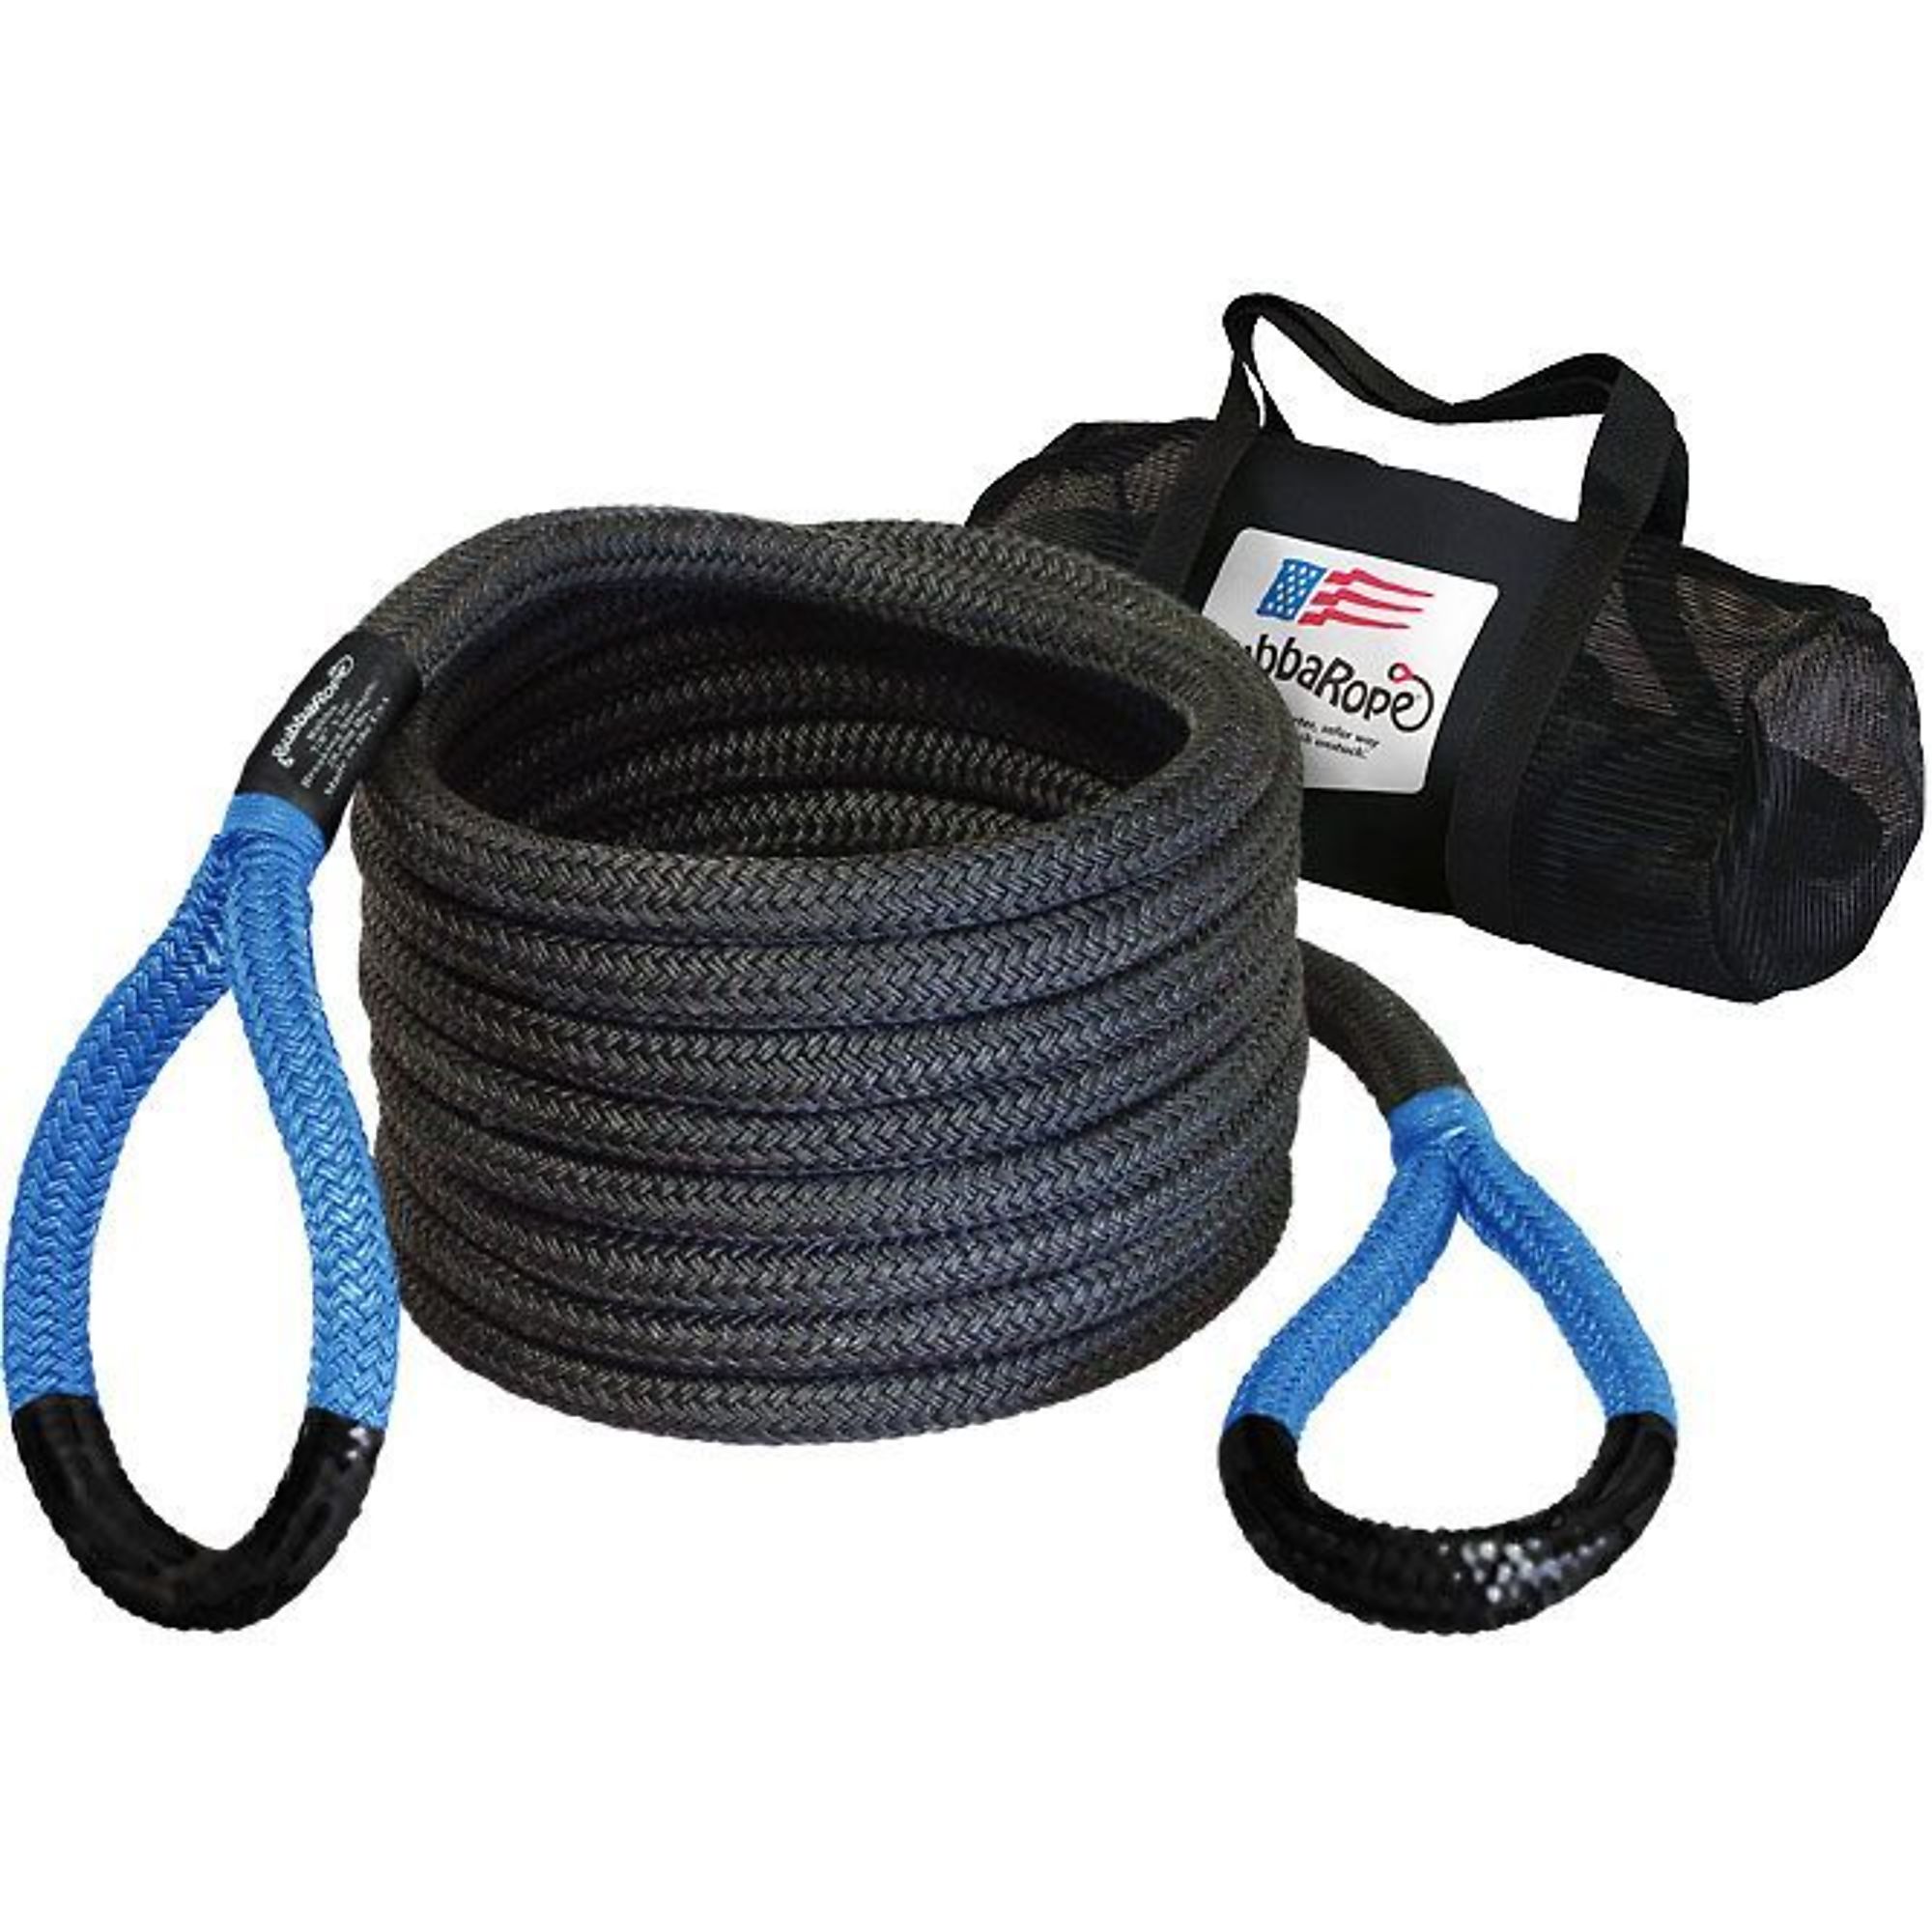 Bubba Rope 7/8, 20 ft Rope, Blue